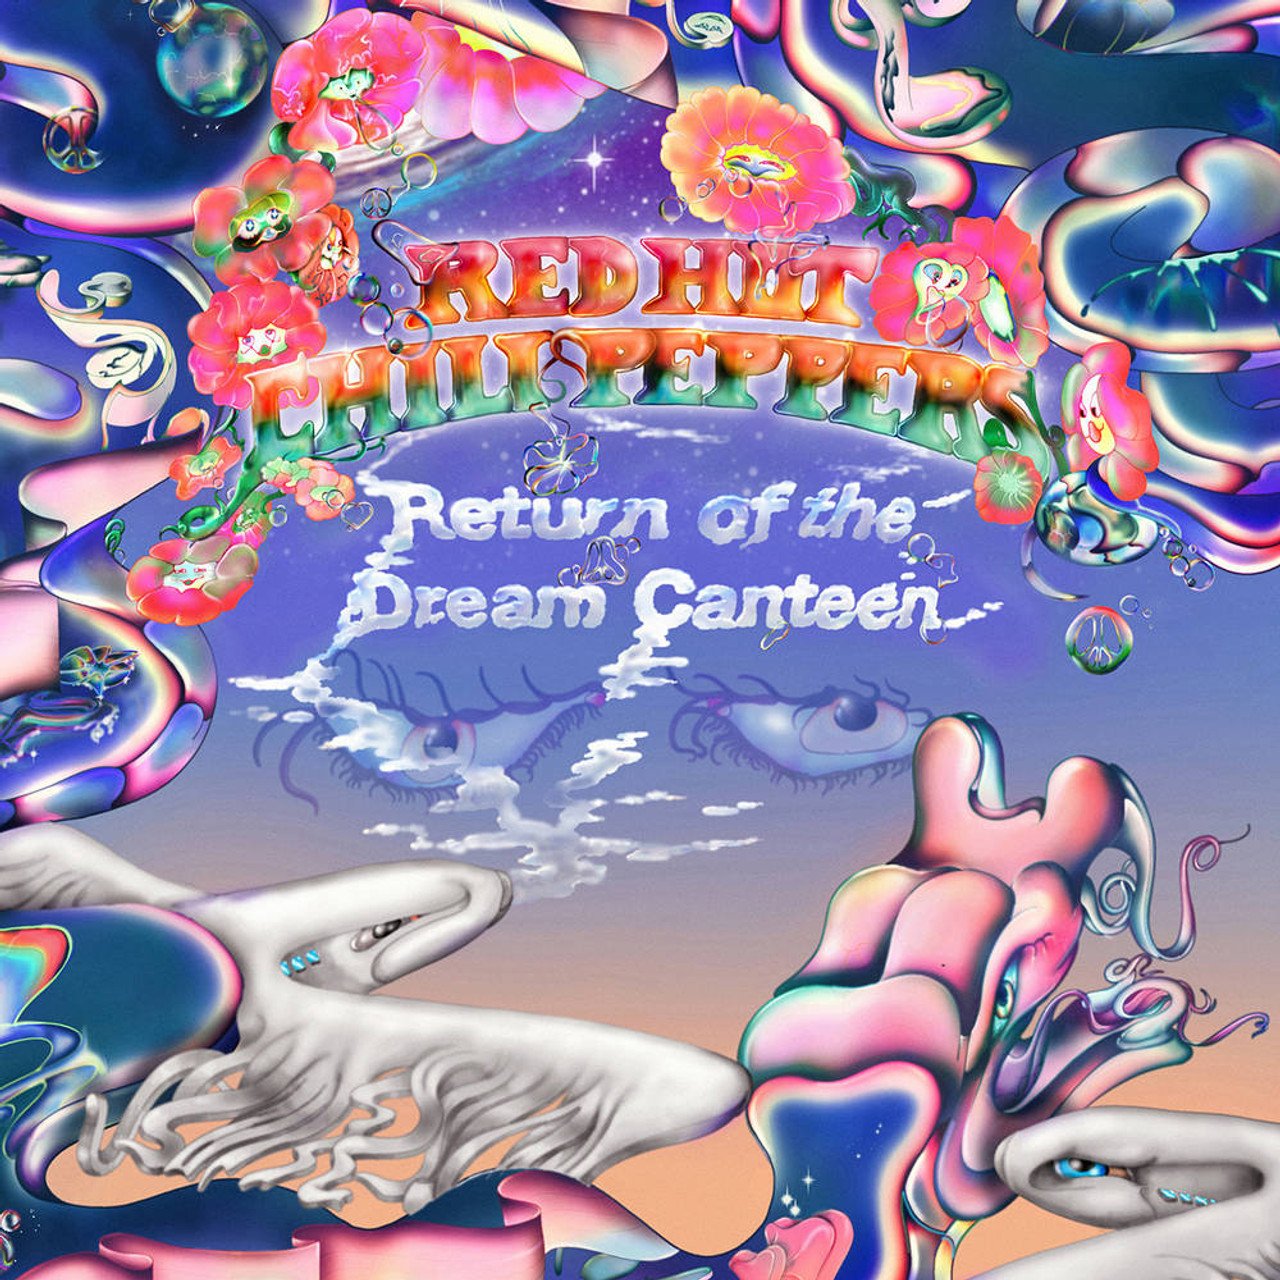 Red Hot Chili Peppers "Return of the Dream Canteen" [Pink Neon Vinyl / Silverboard Cover] 2LP